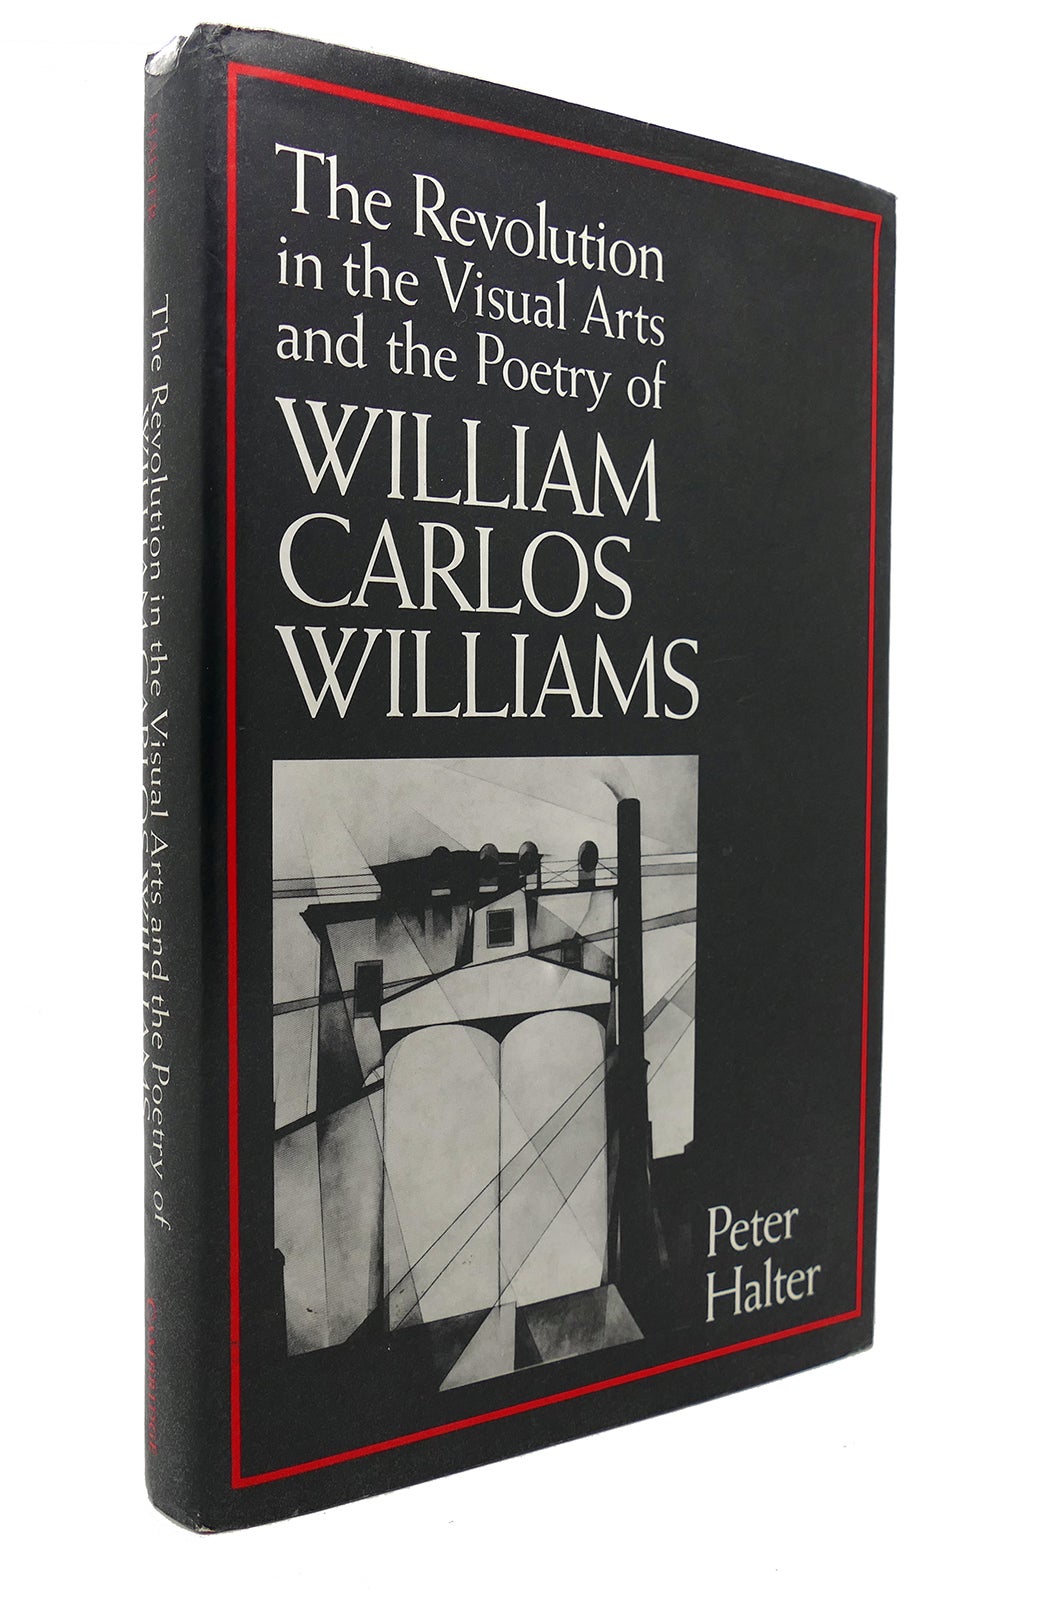 THE REVOLUTION IN THE VISUAL ARTS AND THE POETRY OF WILLIAM CARLOS